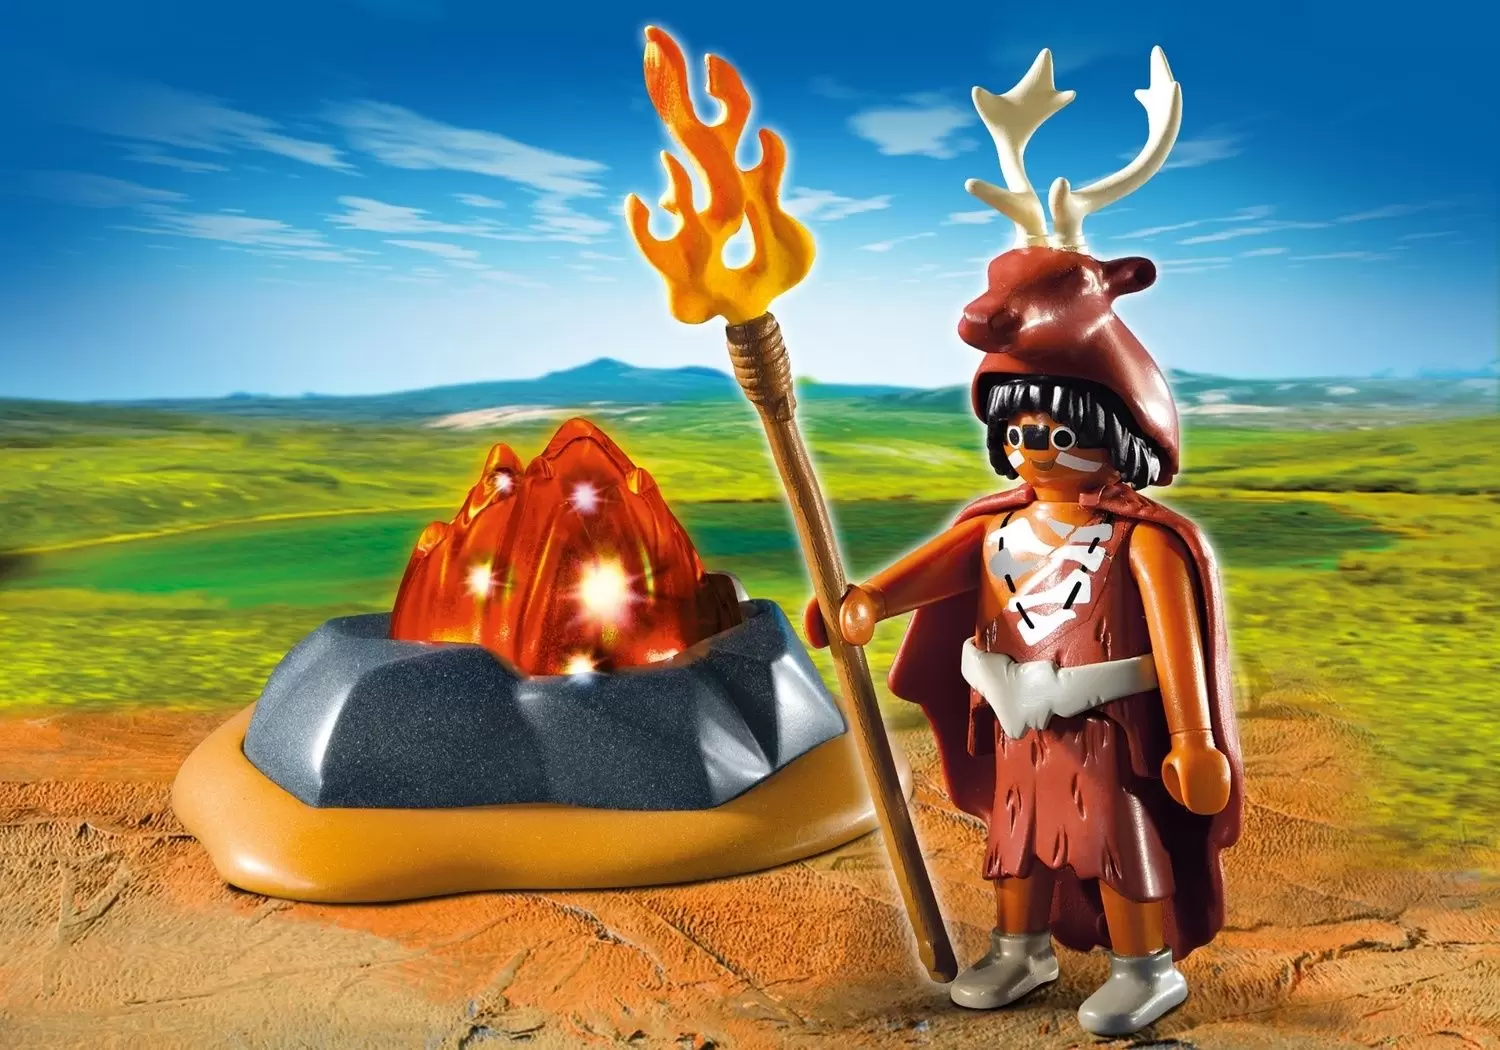 Playmobil Prehostoric - Fire Guardian with LED Fire